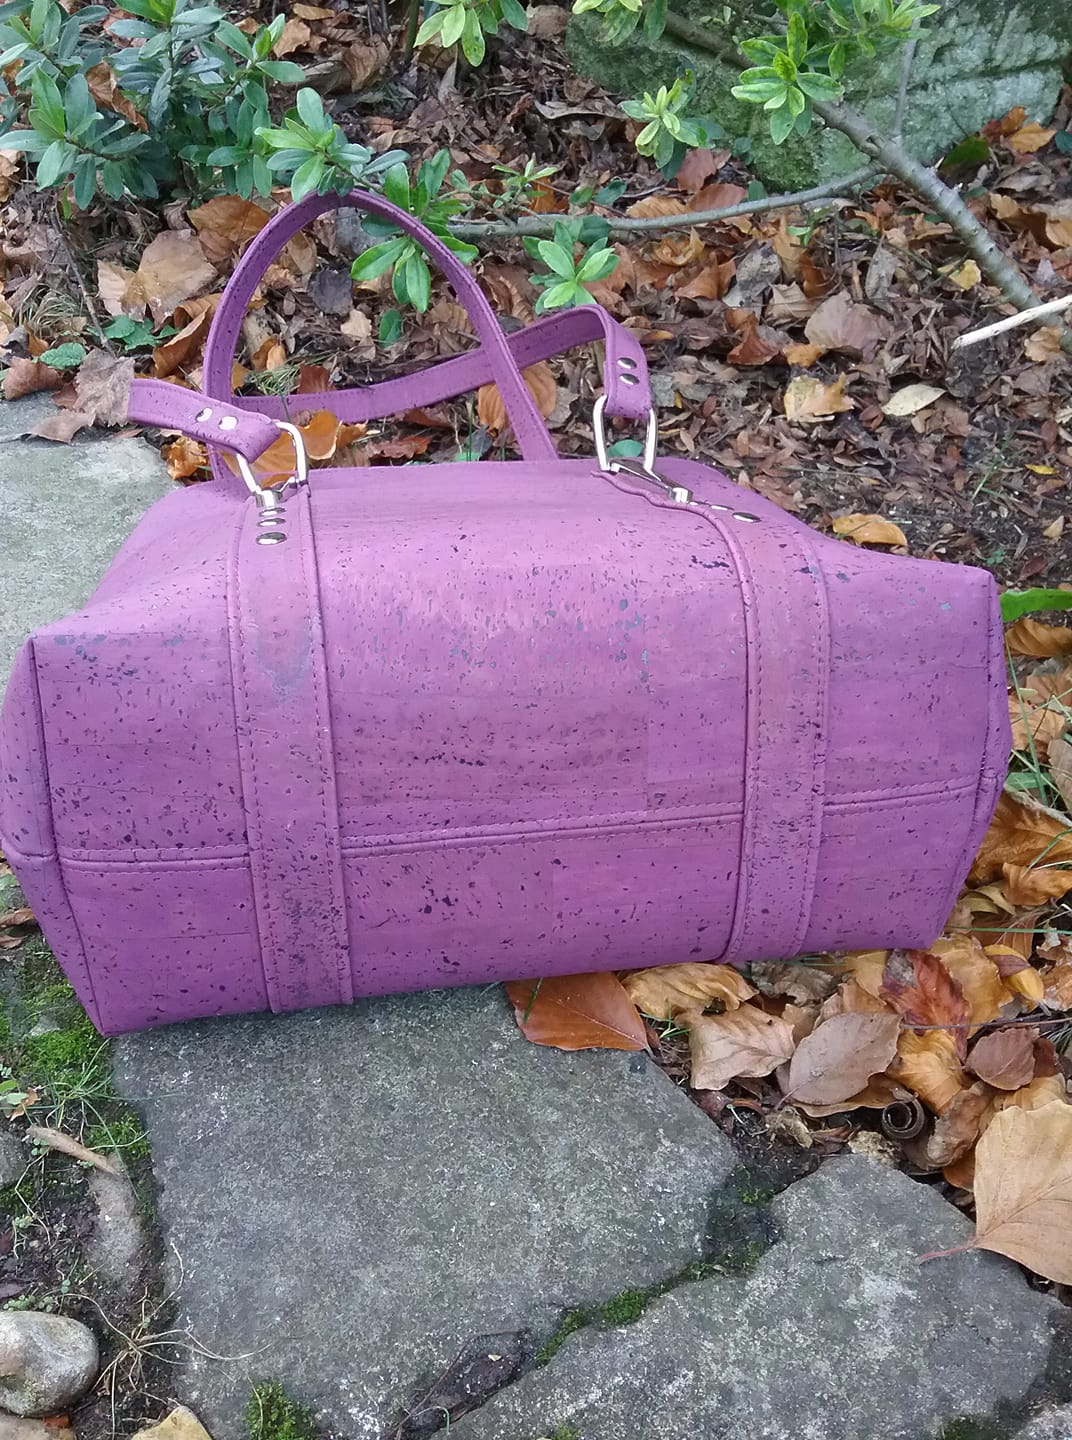 A hacked Jangles Anchor Bag made by Lynn of LBP Bespoke